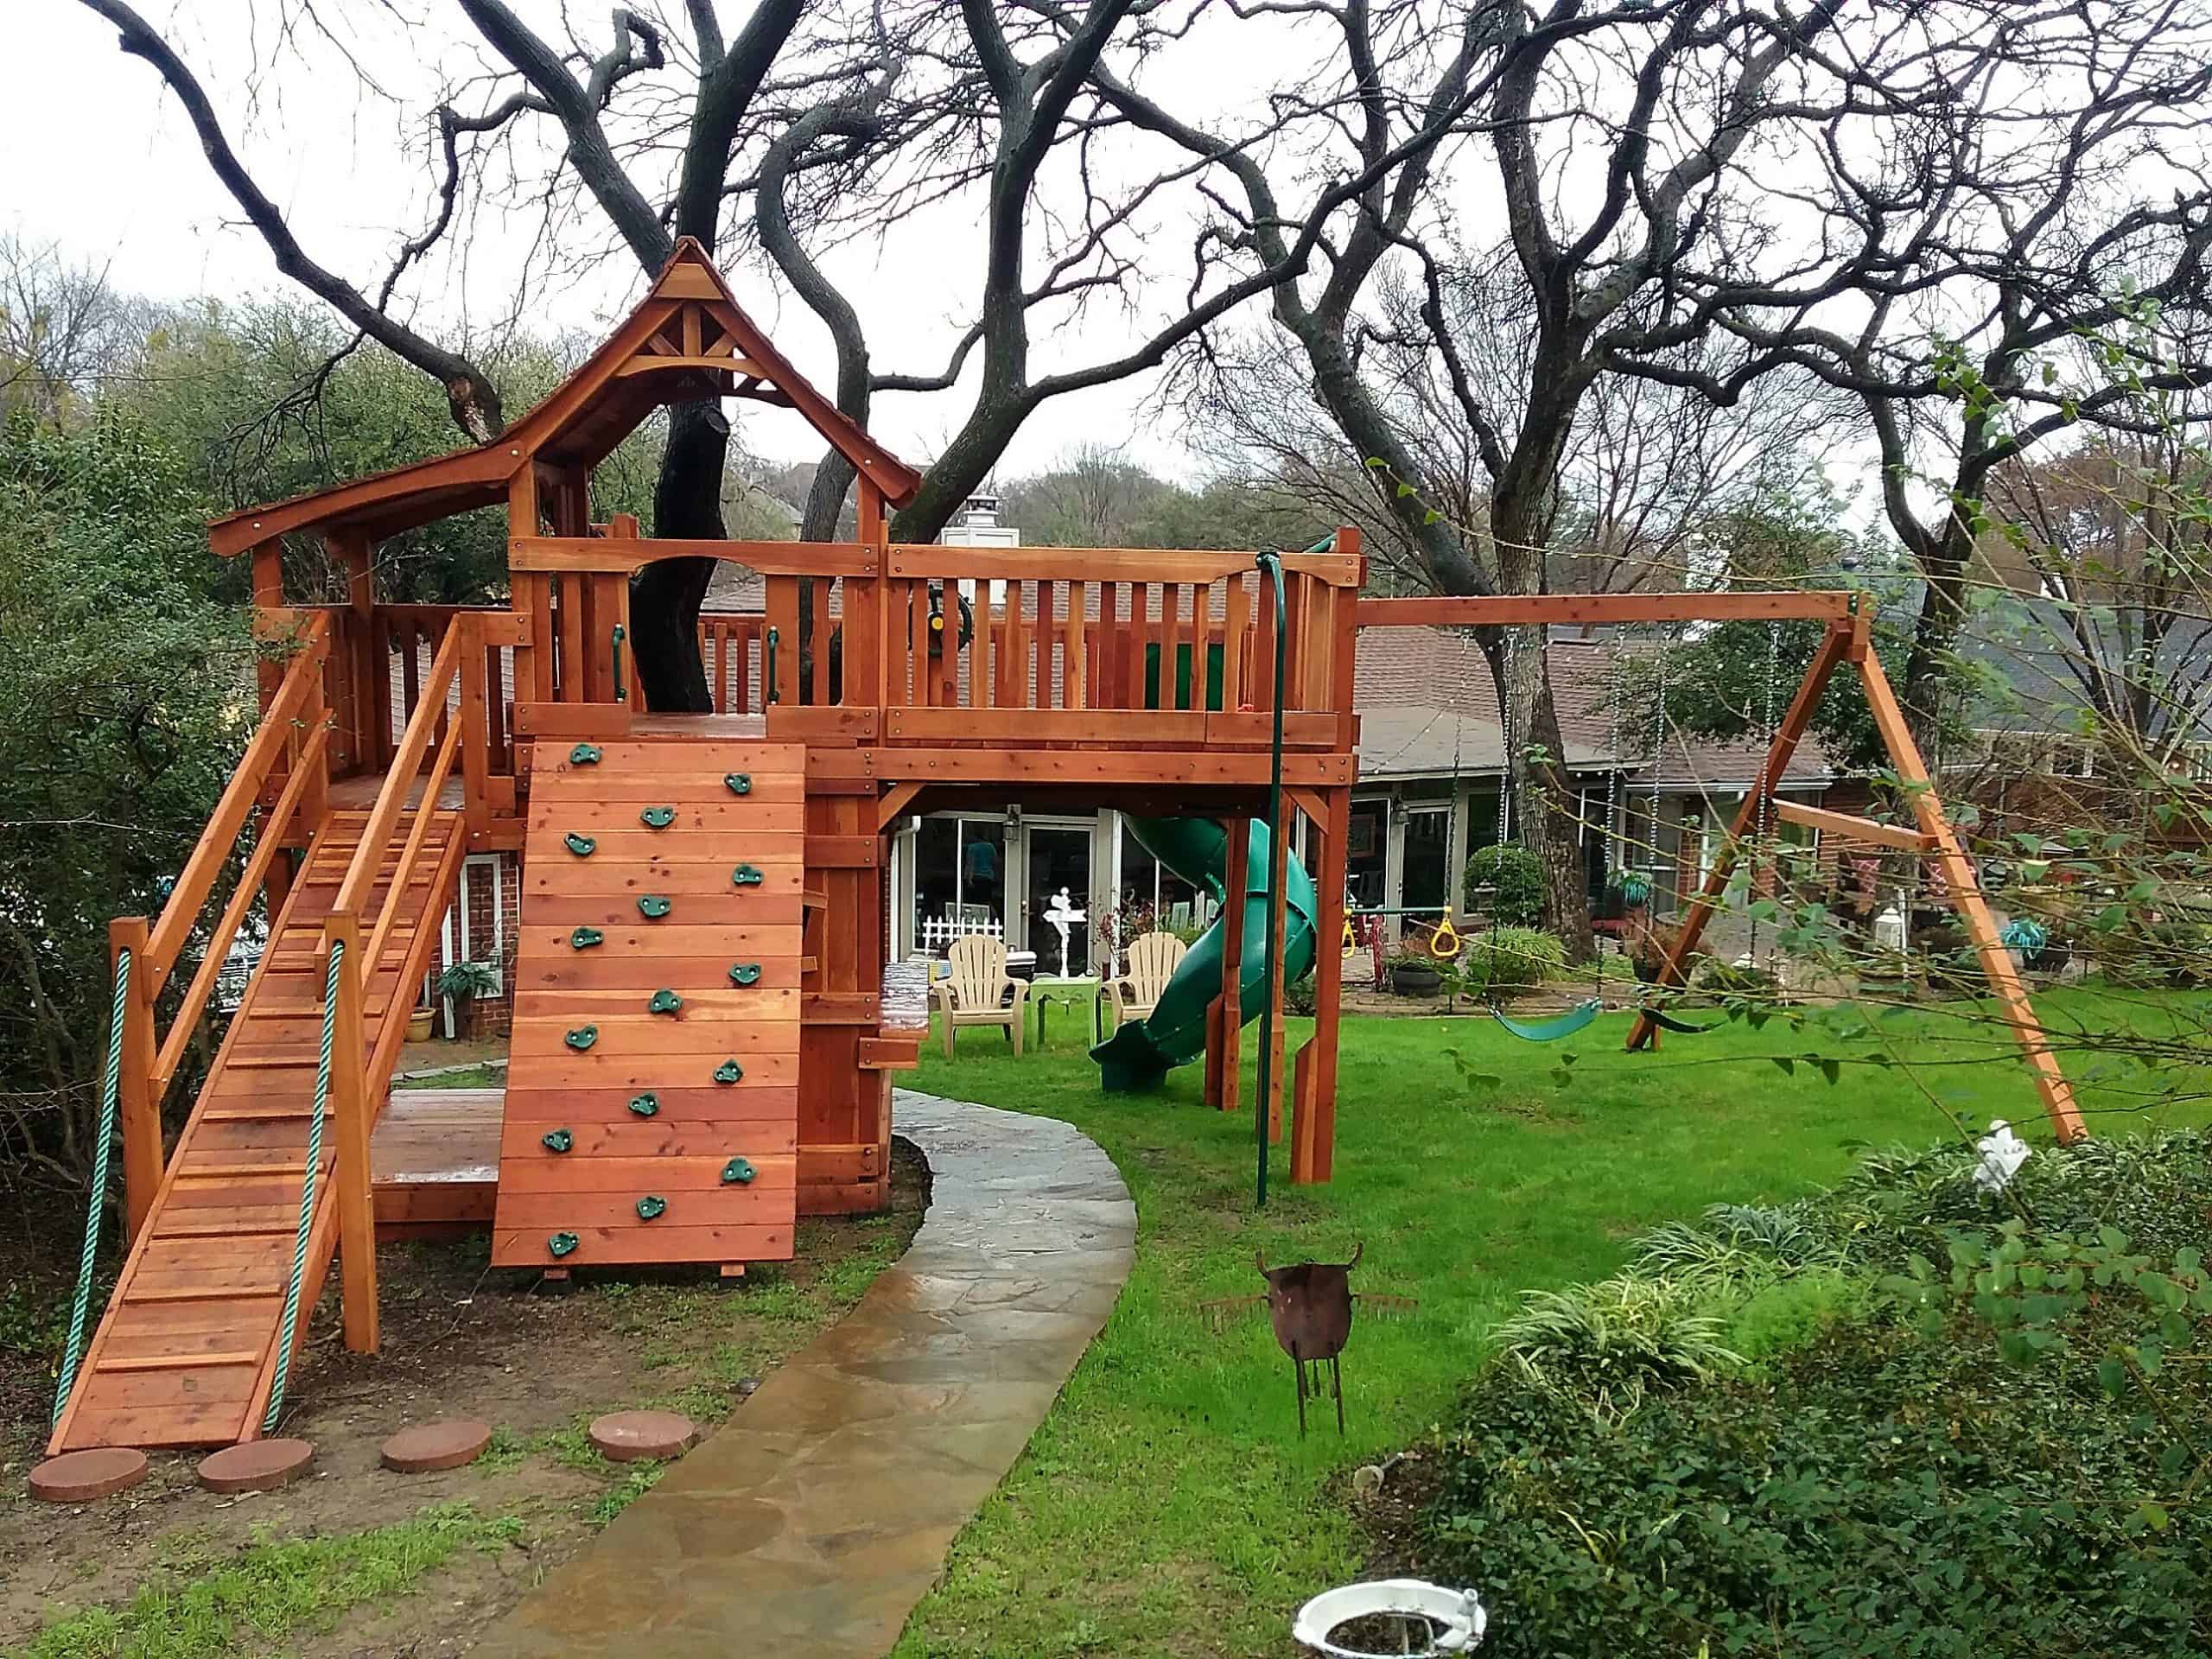 Decatur Texas wooden swing set for children with rock wall and ramp